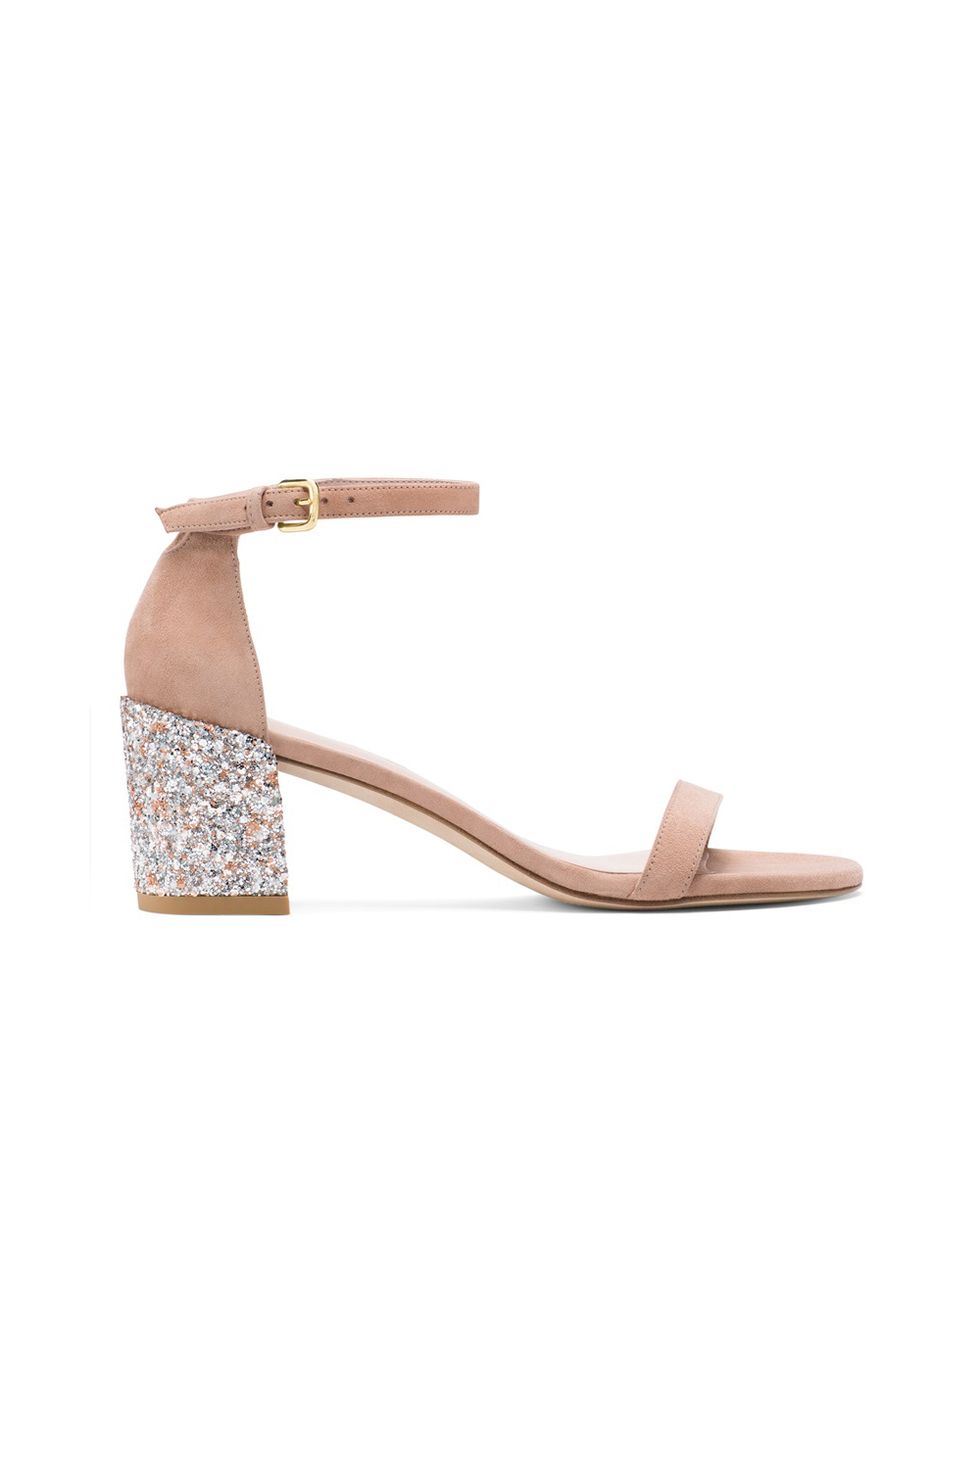 <p>Does it even count as heels if it's so low? Yes, and the<br><br>
ankle strap and glitter detail make it even ~fancier~.&nbsp;</p><p><span class="redactor-invisible-space" data-verified="redactor" data-redactor-tag="span" data-redactor-class="redactor-invisible-space"></span></p><p><span class="redactor-invisible-space" data-verified="redactor" data-redactor-tag="span" data-redactor-class="redactor-invisible-space"><br><br>
The SimpleMid Sandal, $398; <a href="http://www.stuartweitzman.com/products/simplemid/naked-suede/?DepartmentId=687&amp;DepartmentGroupId=1 " target="_blank" data-tracking-id="recirc-text-link">stuartweitzman.com</a></span></p><p><span class="redactor-invisible-space" data-verified="redactor" data-redactor-tag="span" data-redactor-class="redactor-invisible-space"></span><br></p>